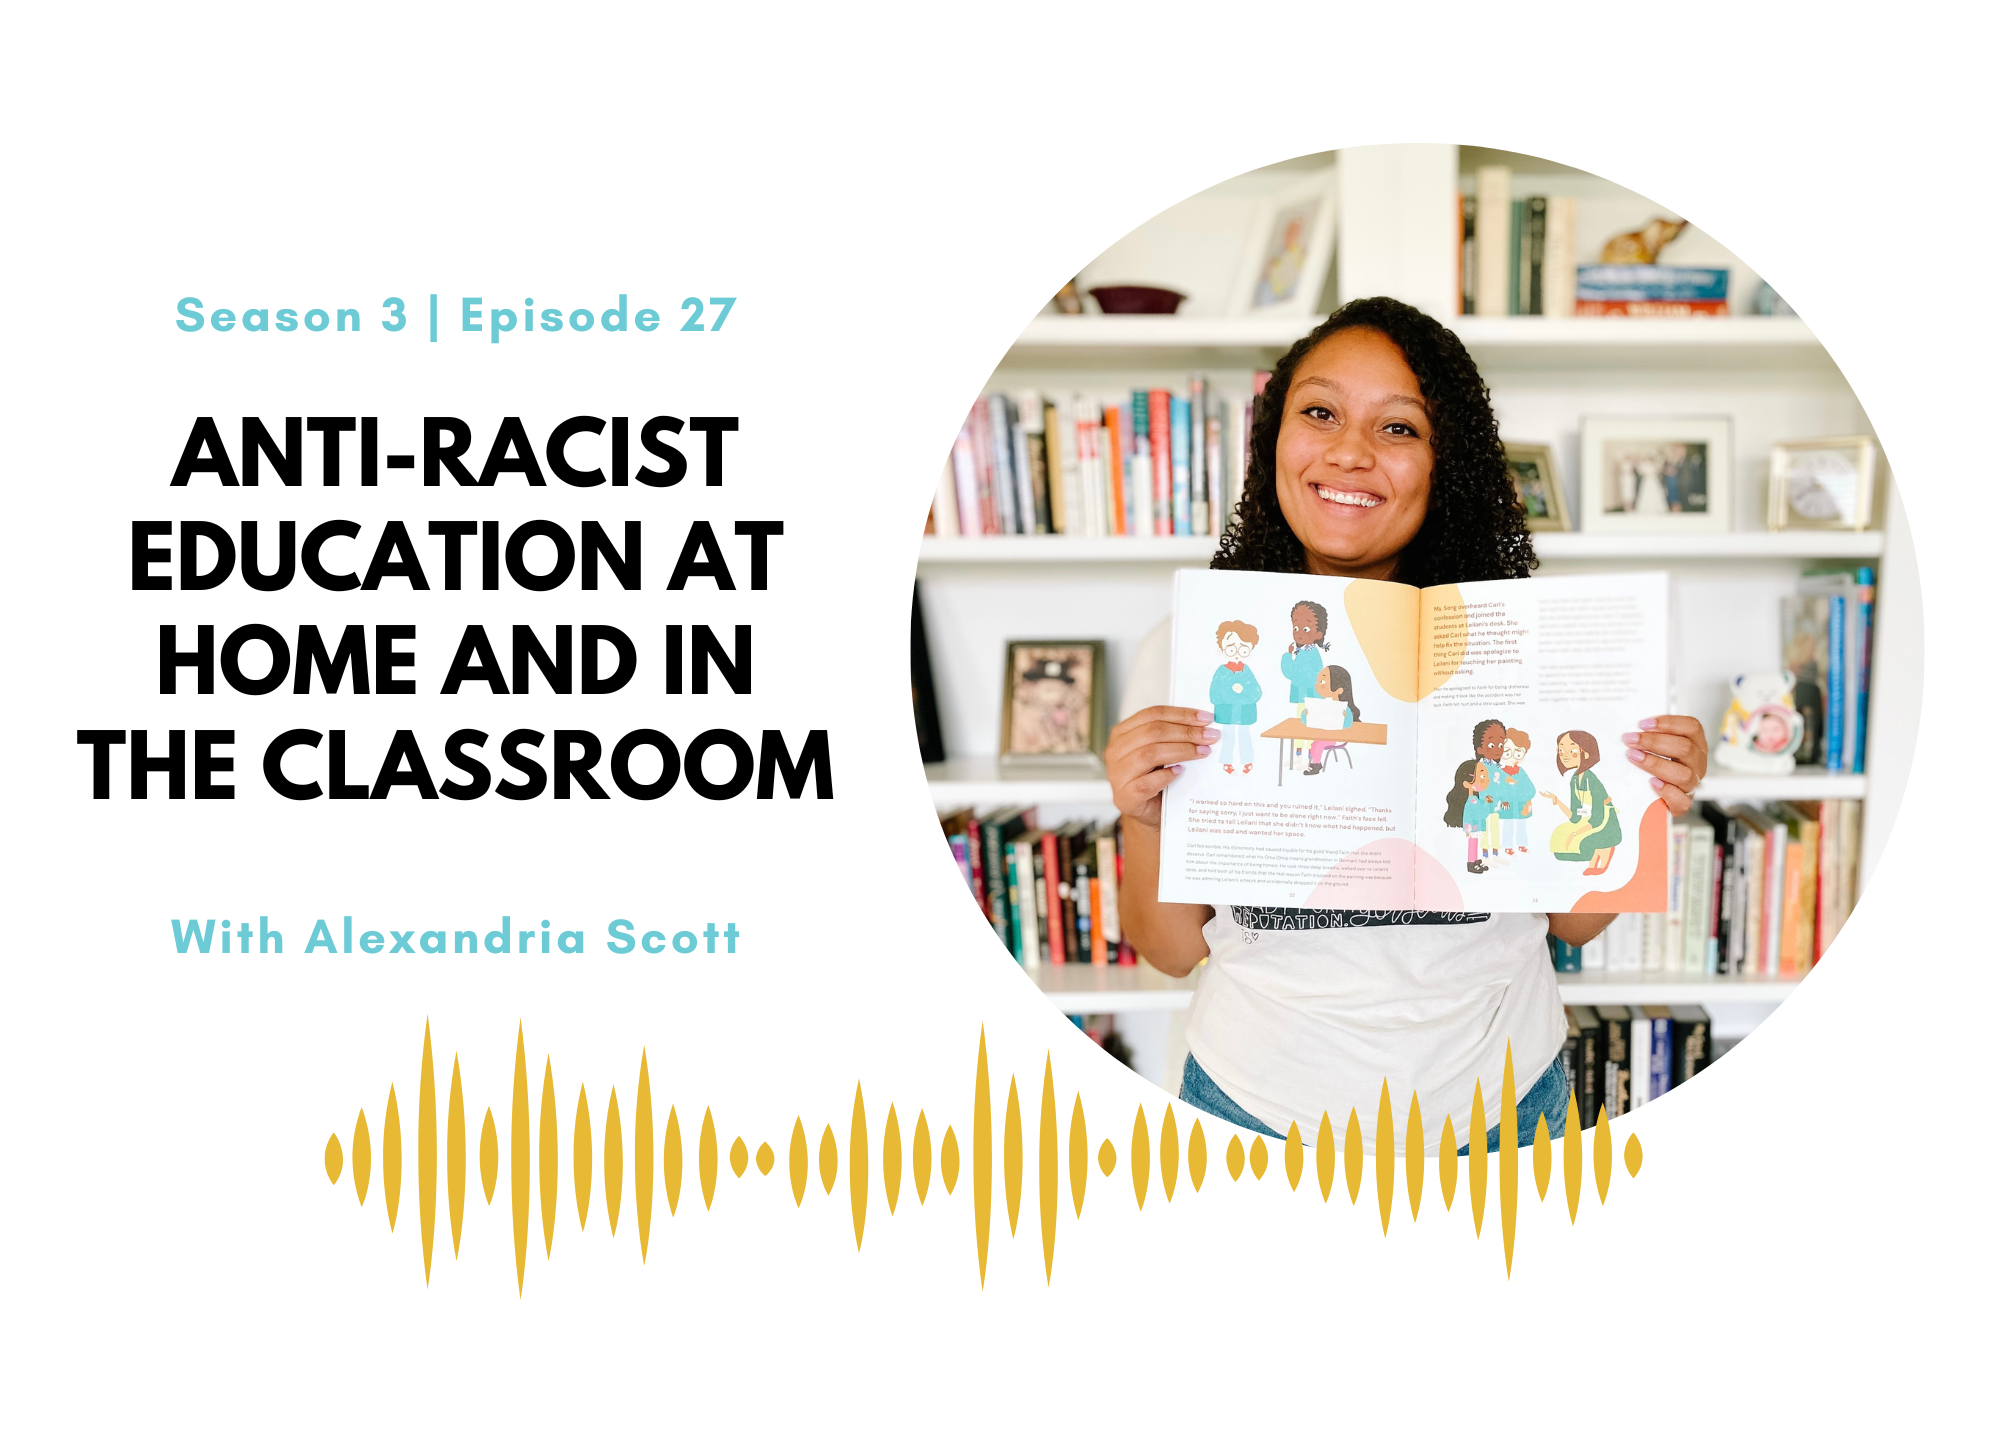 Anti-Racist Education at Home and in the Classroom